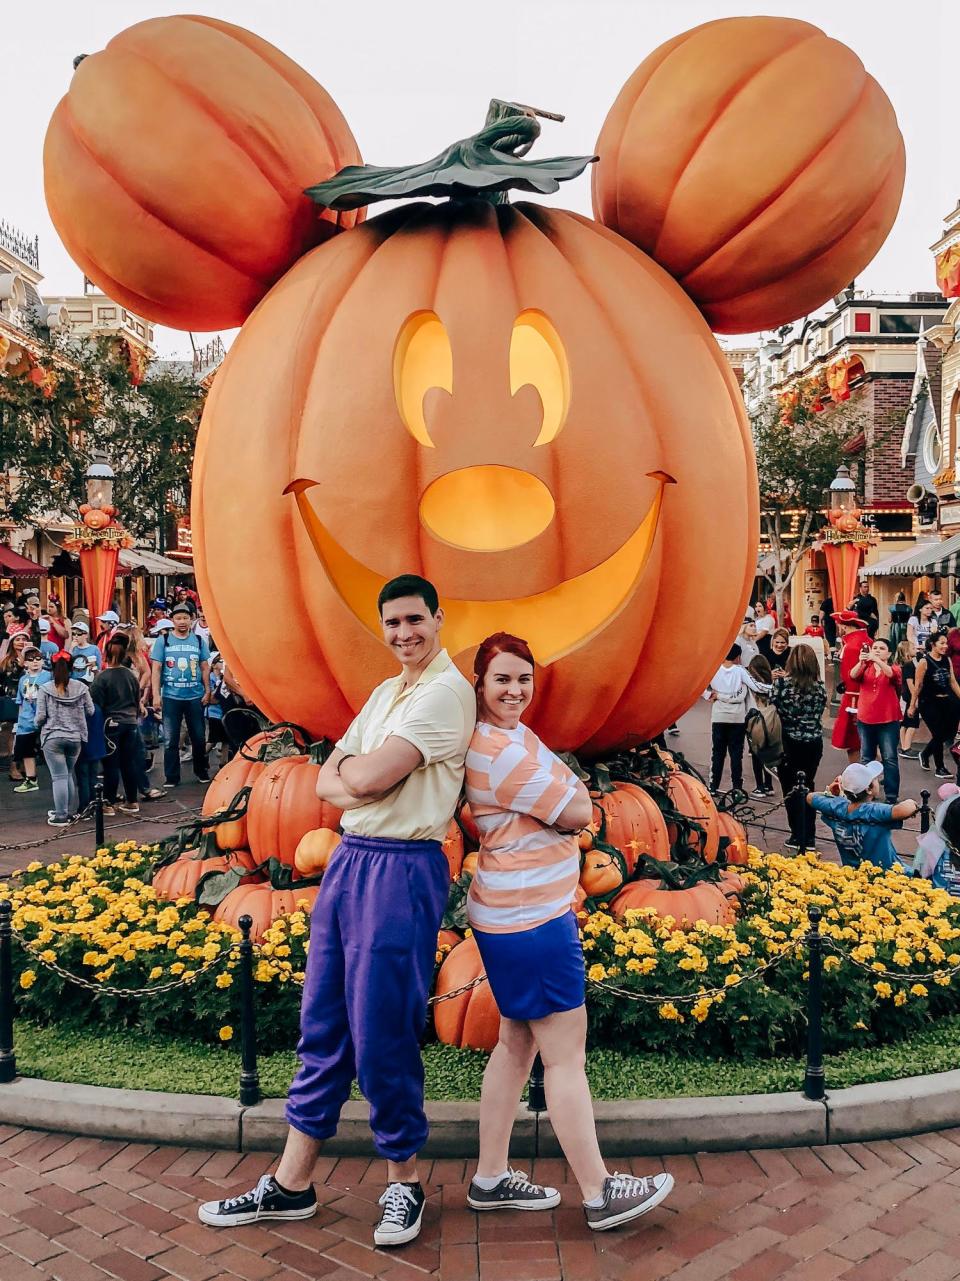 Disney fan Mel and her partner dress as Phineas and Ferb for Halloween at Disneyland.